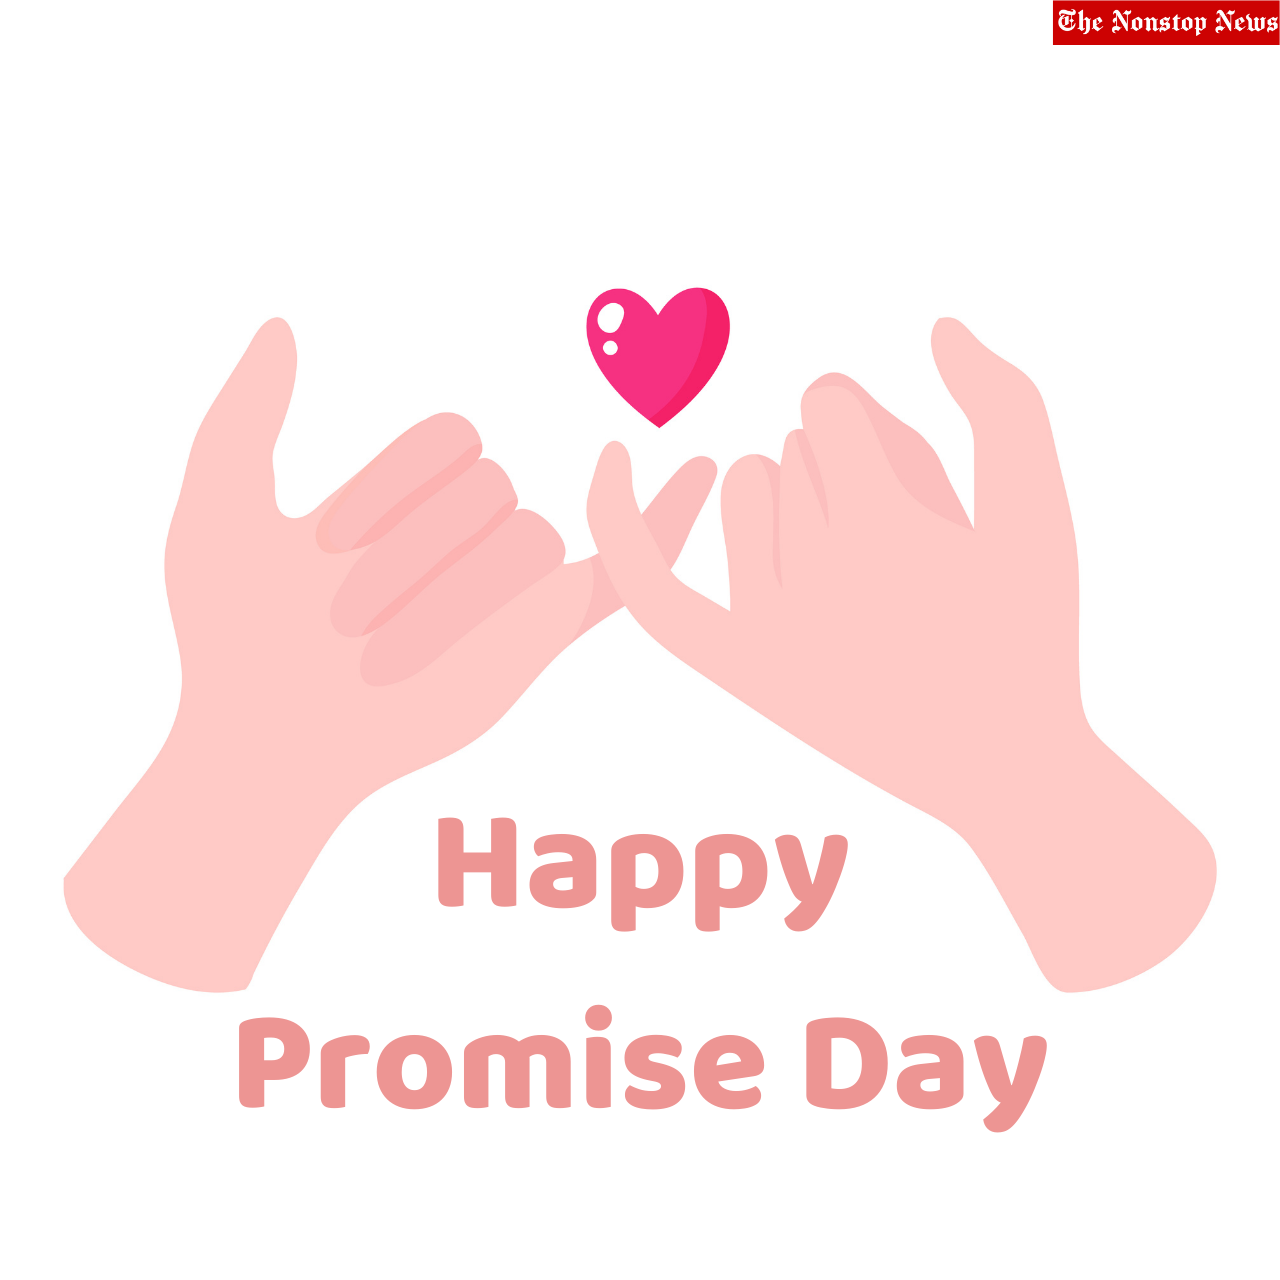 Promise Day 2022: Wishes, Quotes, HD Images, Messages, Status, Shayari to greet your love on the 4th day of Valentine's week